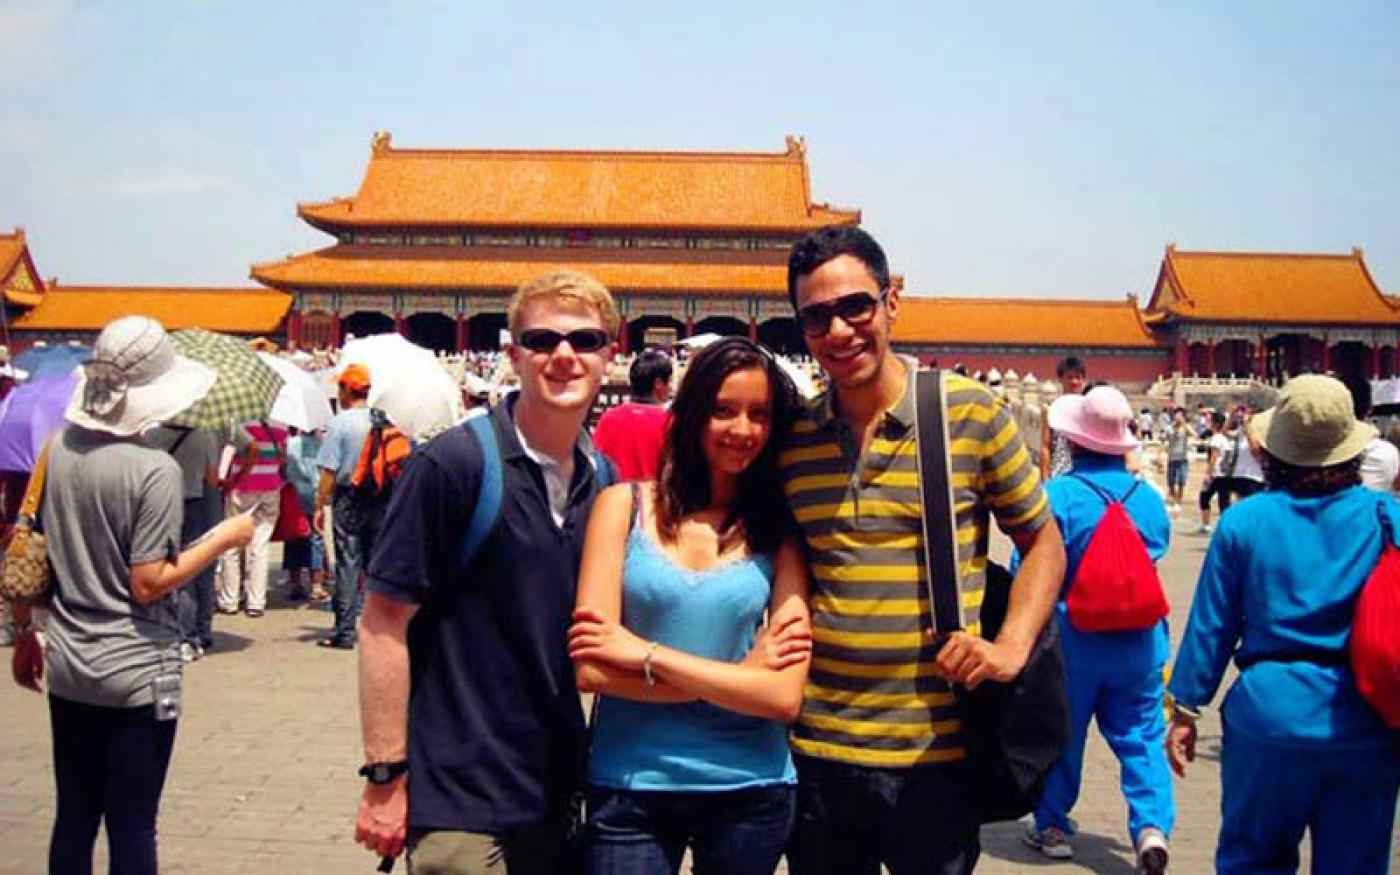 Go Abroad China: Internships With Top International Companies in China